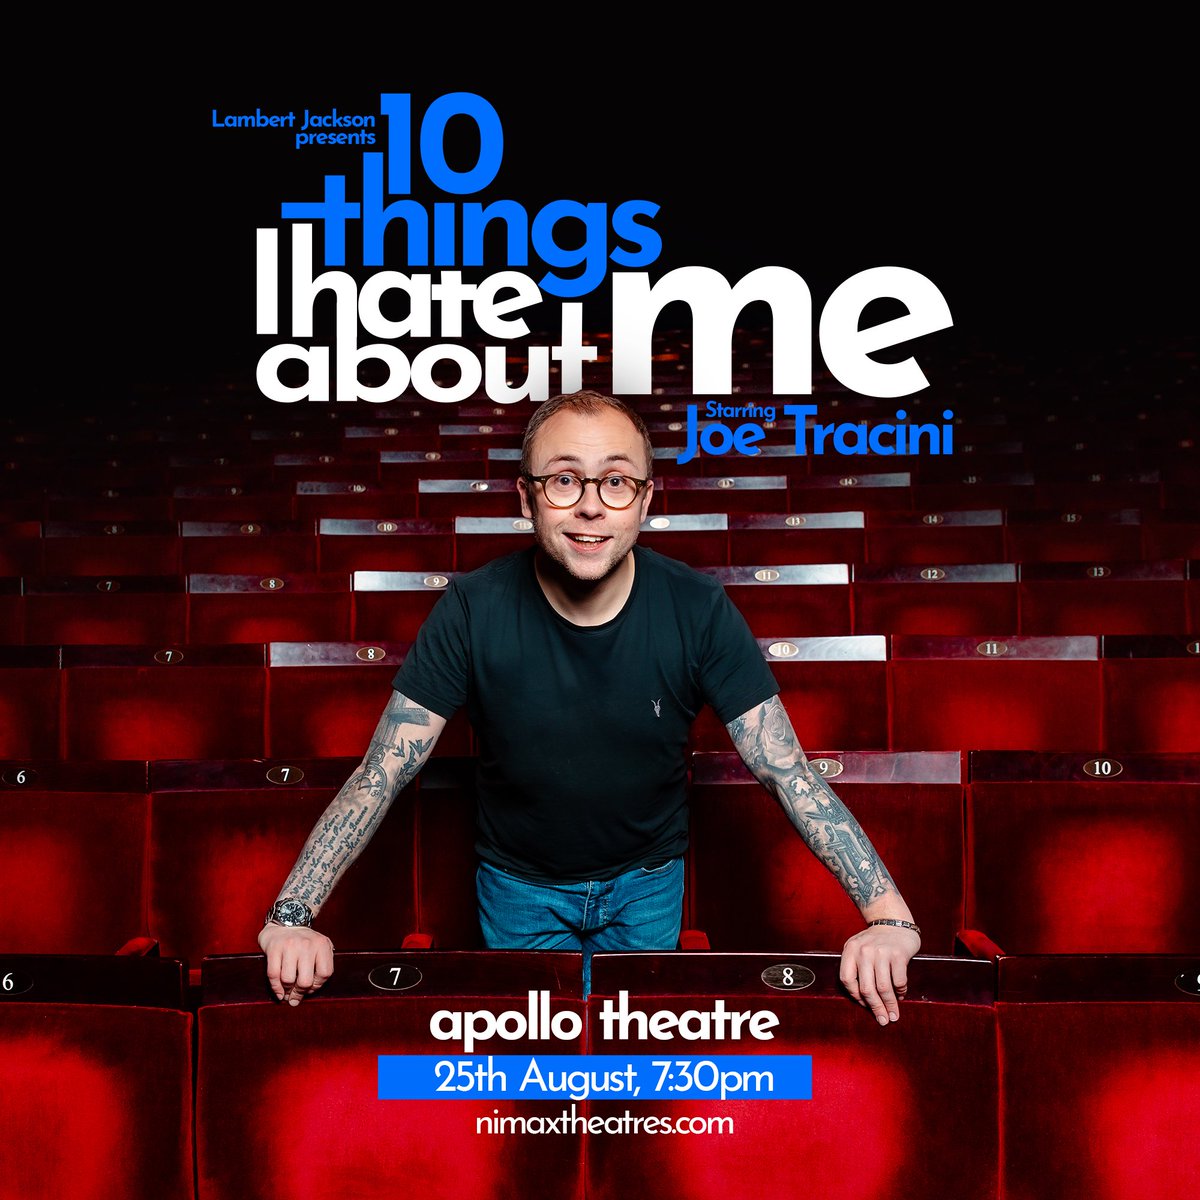 Following last night's Channel 4 documentary 'Me and the Voice in My Head' @joetracini is bringing his one man show 'Ten Things I Hate About Me' to the West End for one night only. He plays the Apollo theatre on 25th August with tickets from nimaxtheatres.com/shows/joe-trac…